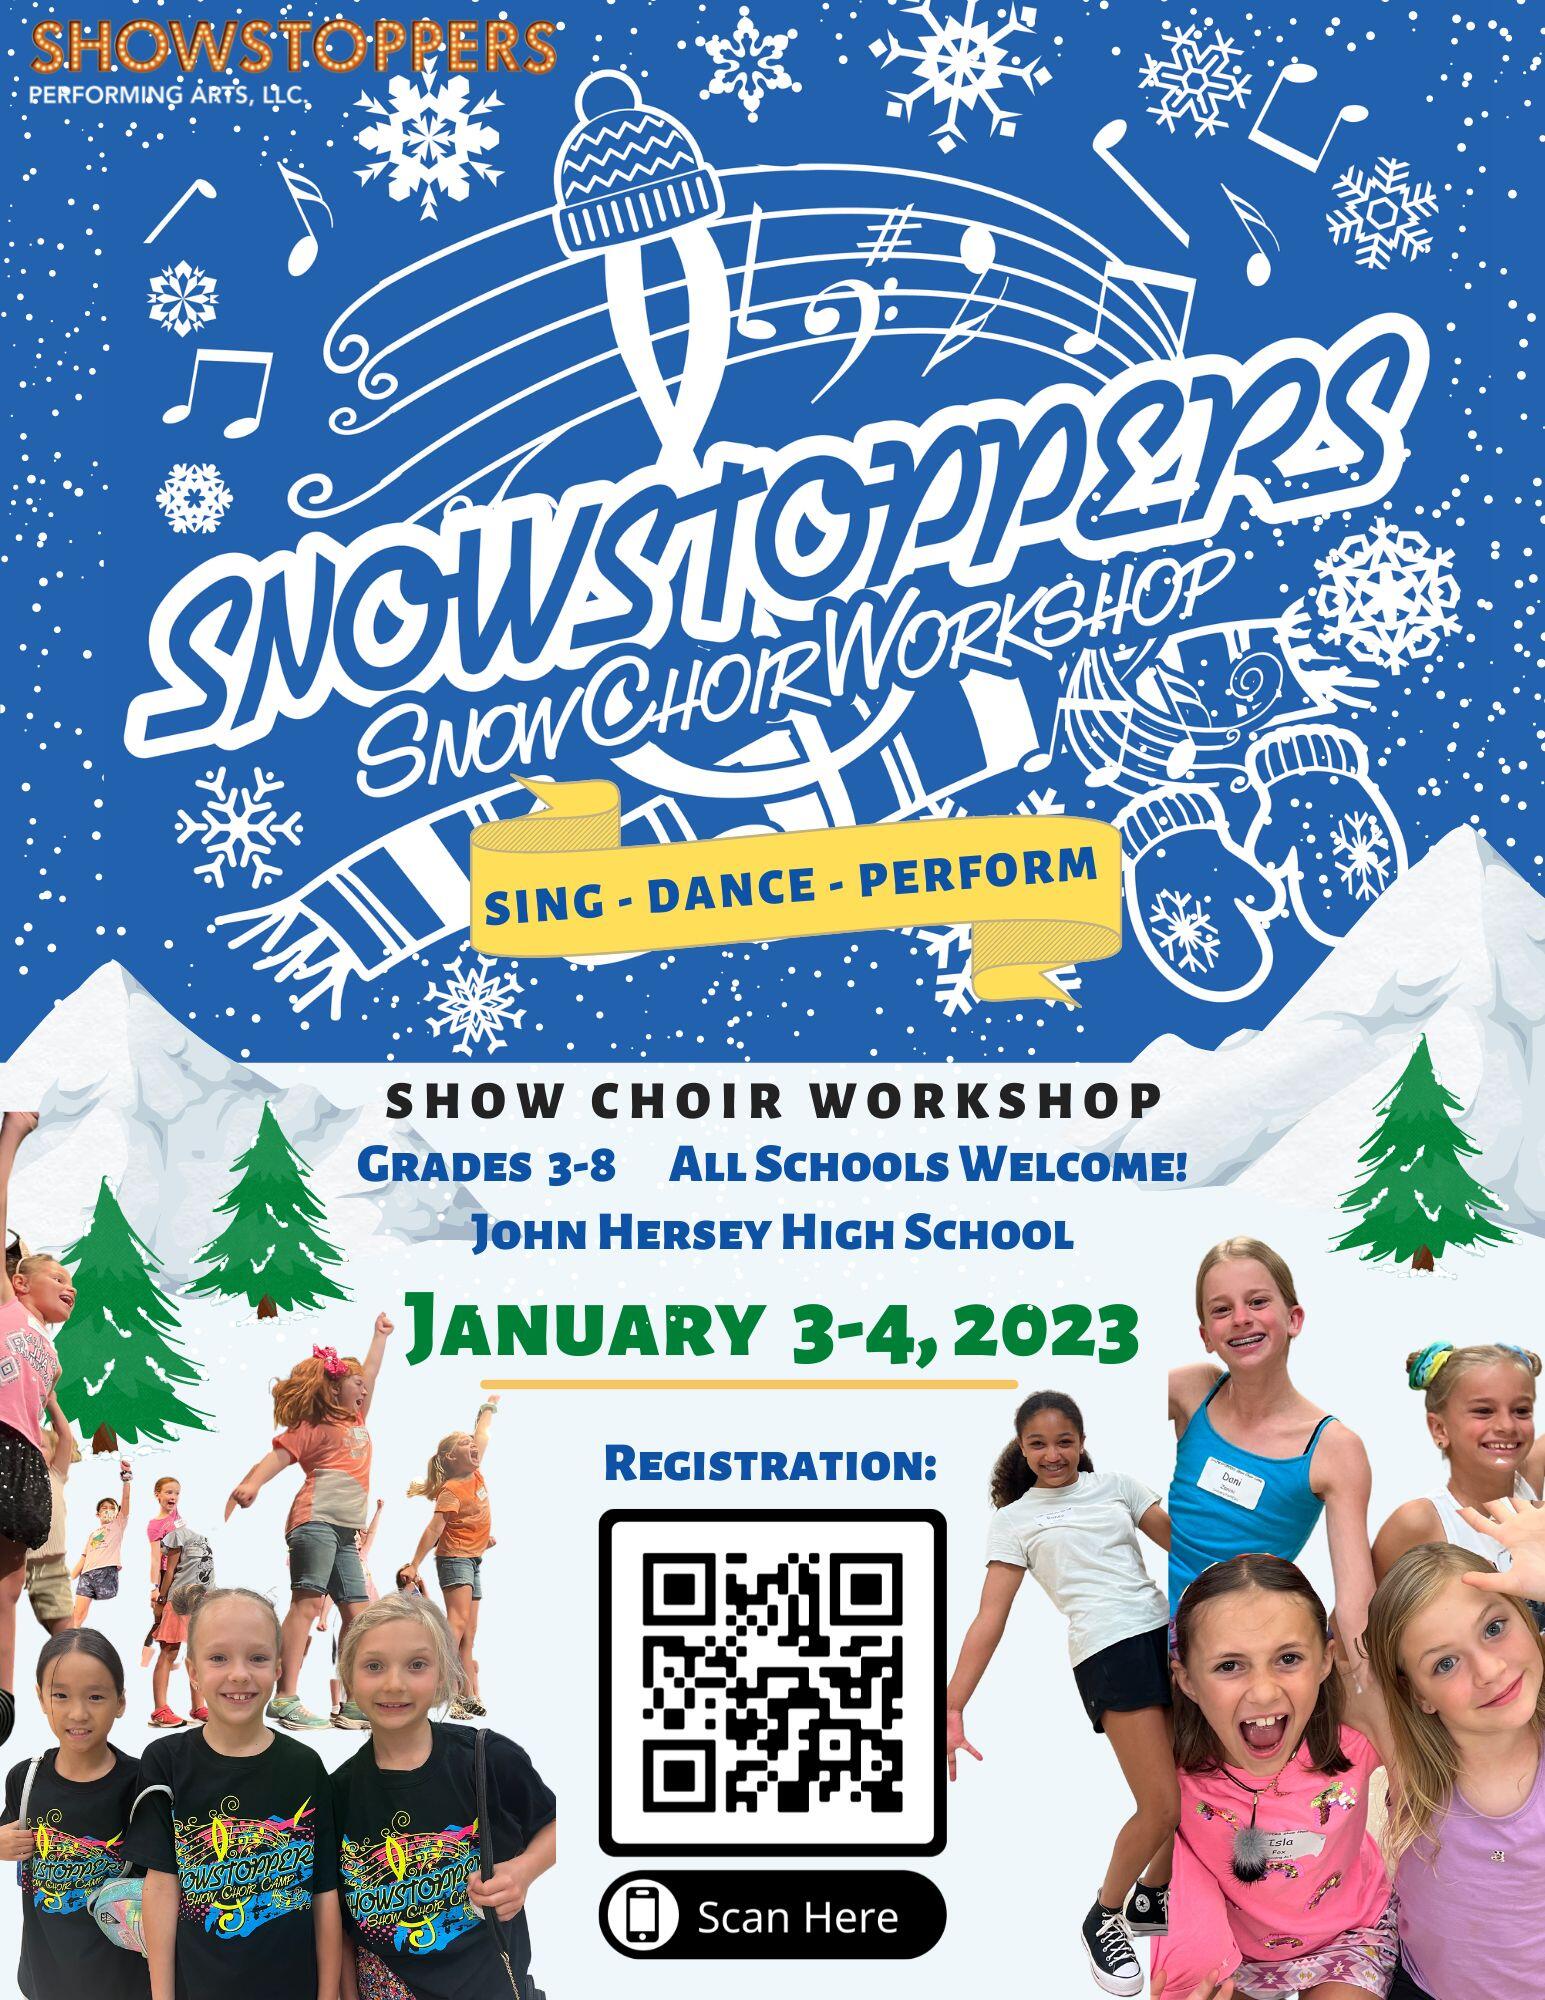 Showtoppers event workshop January 3 to January 4